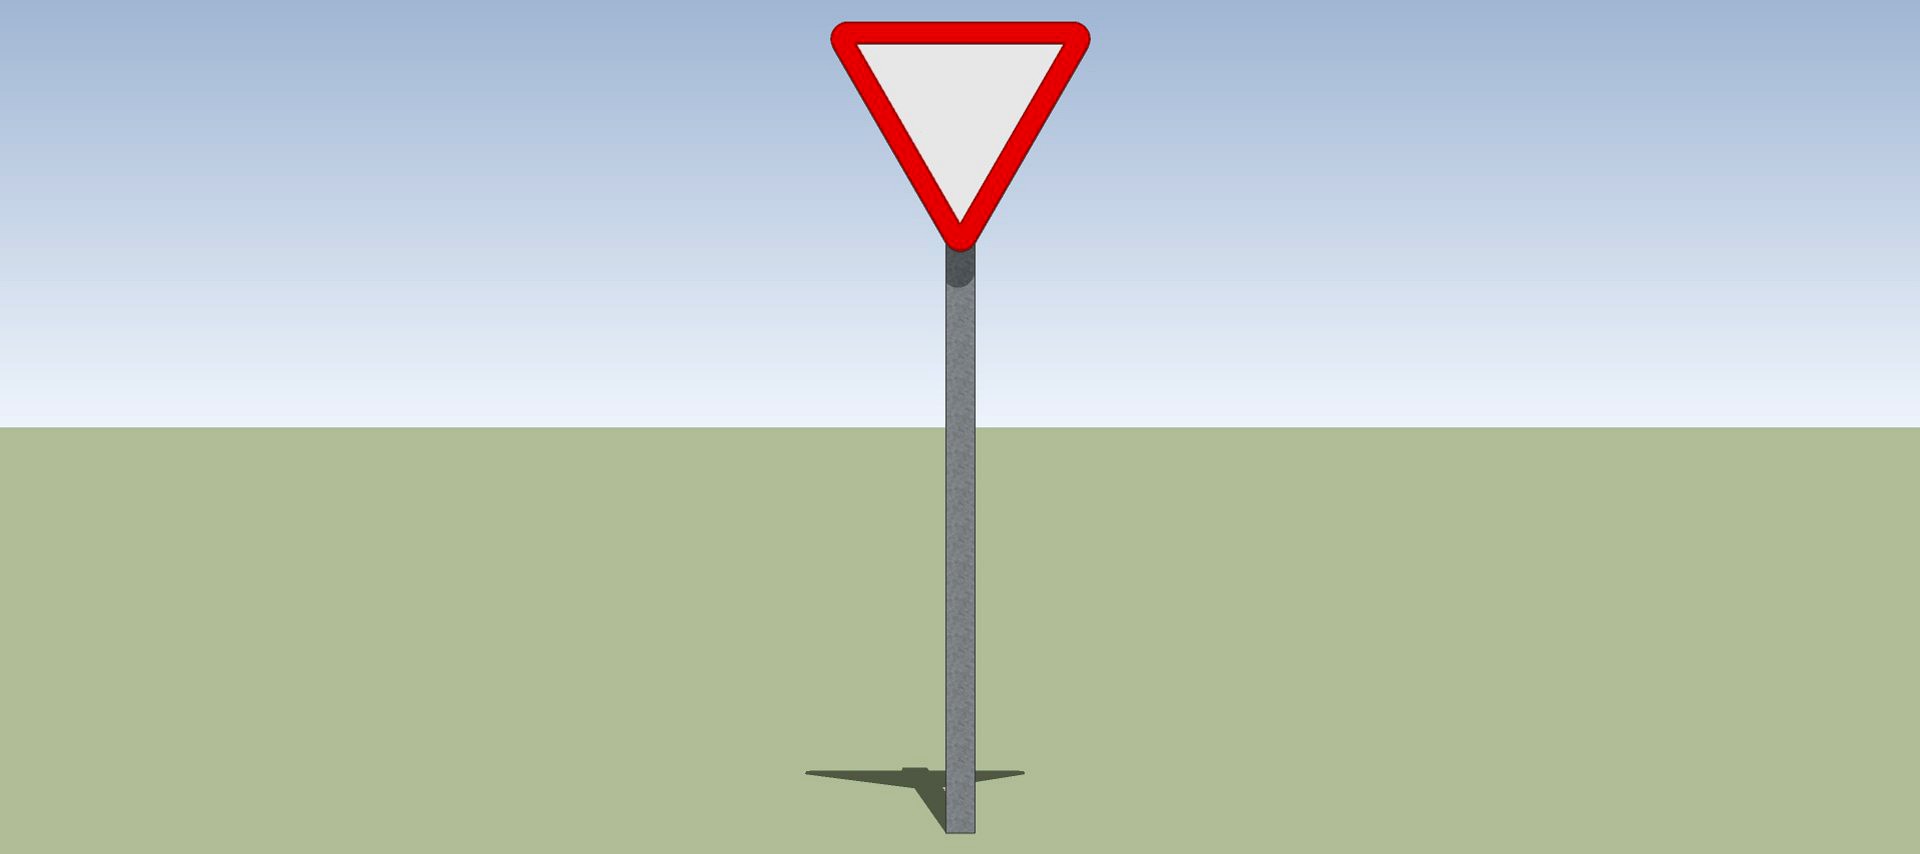 Give Way Sign (witout text)